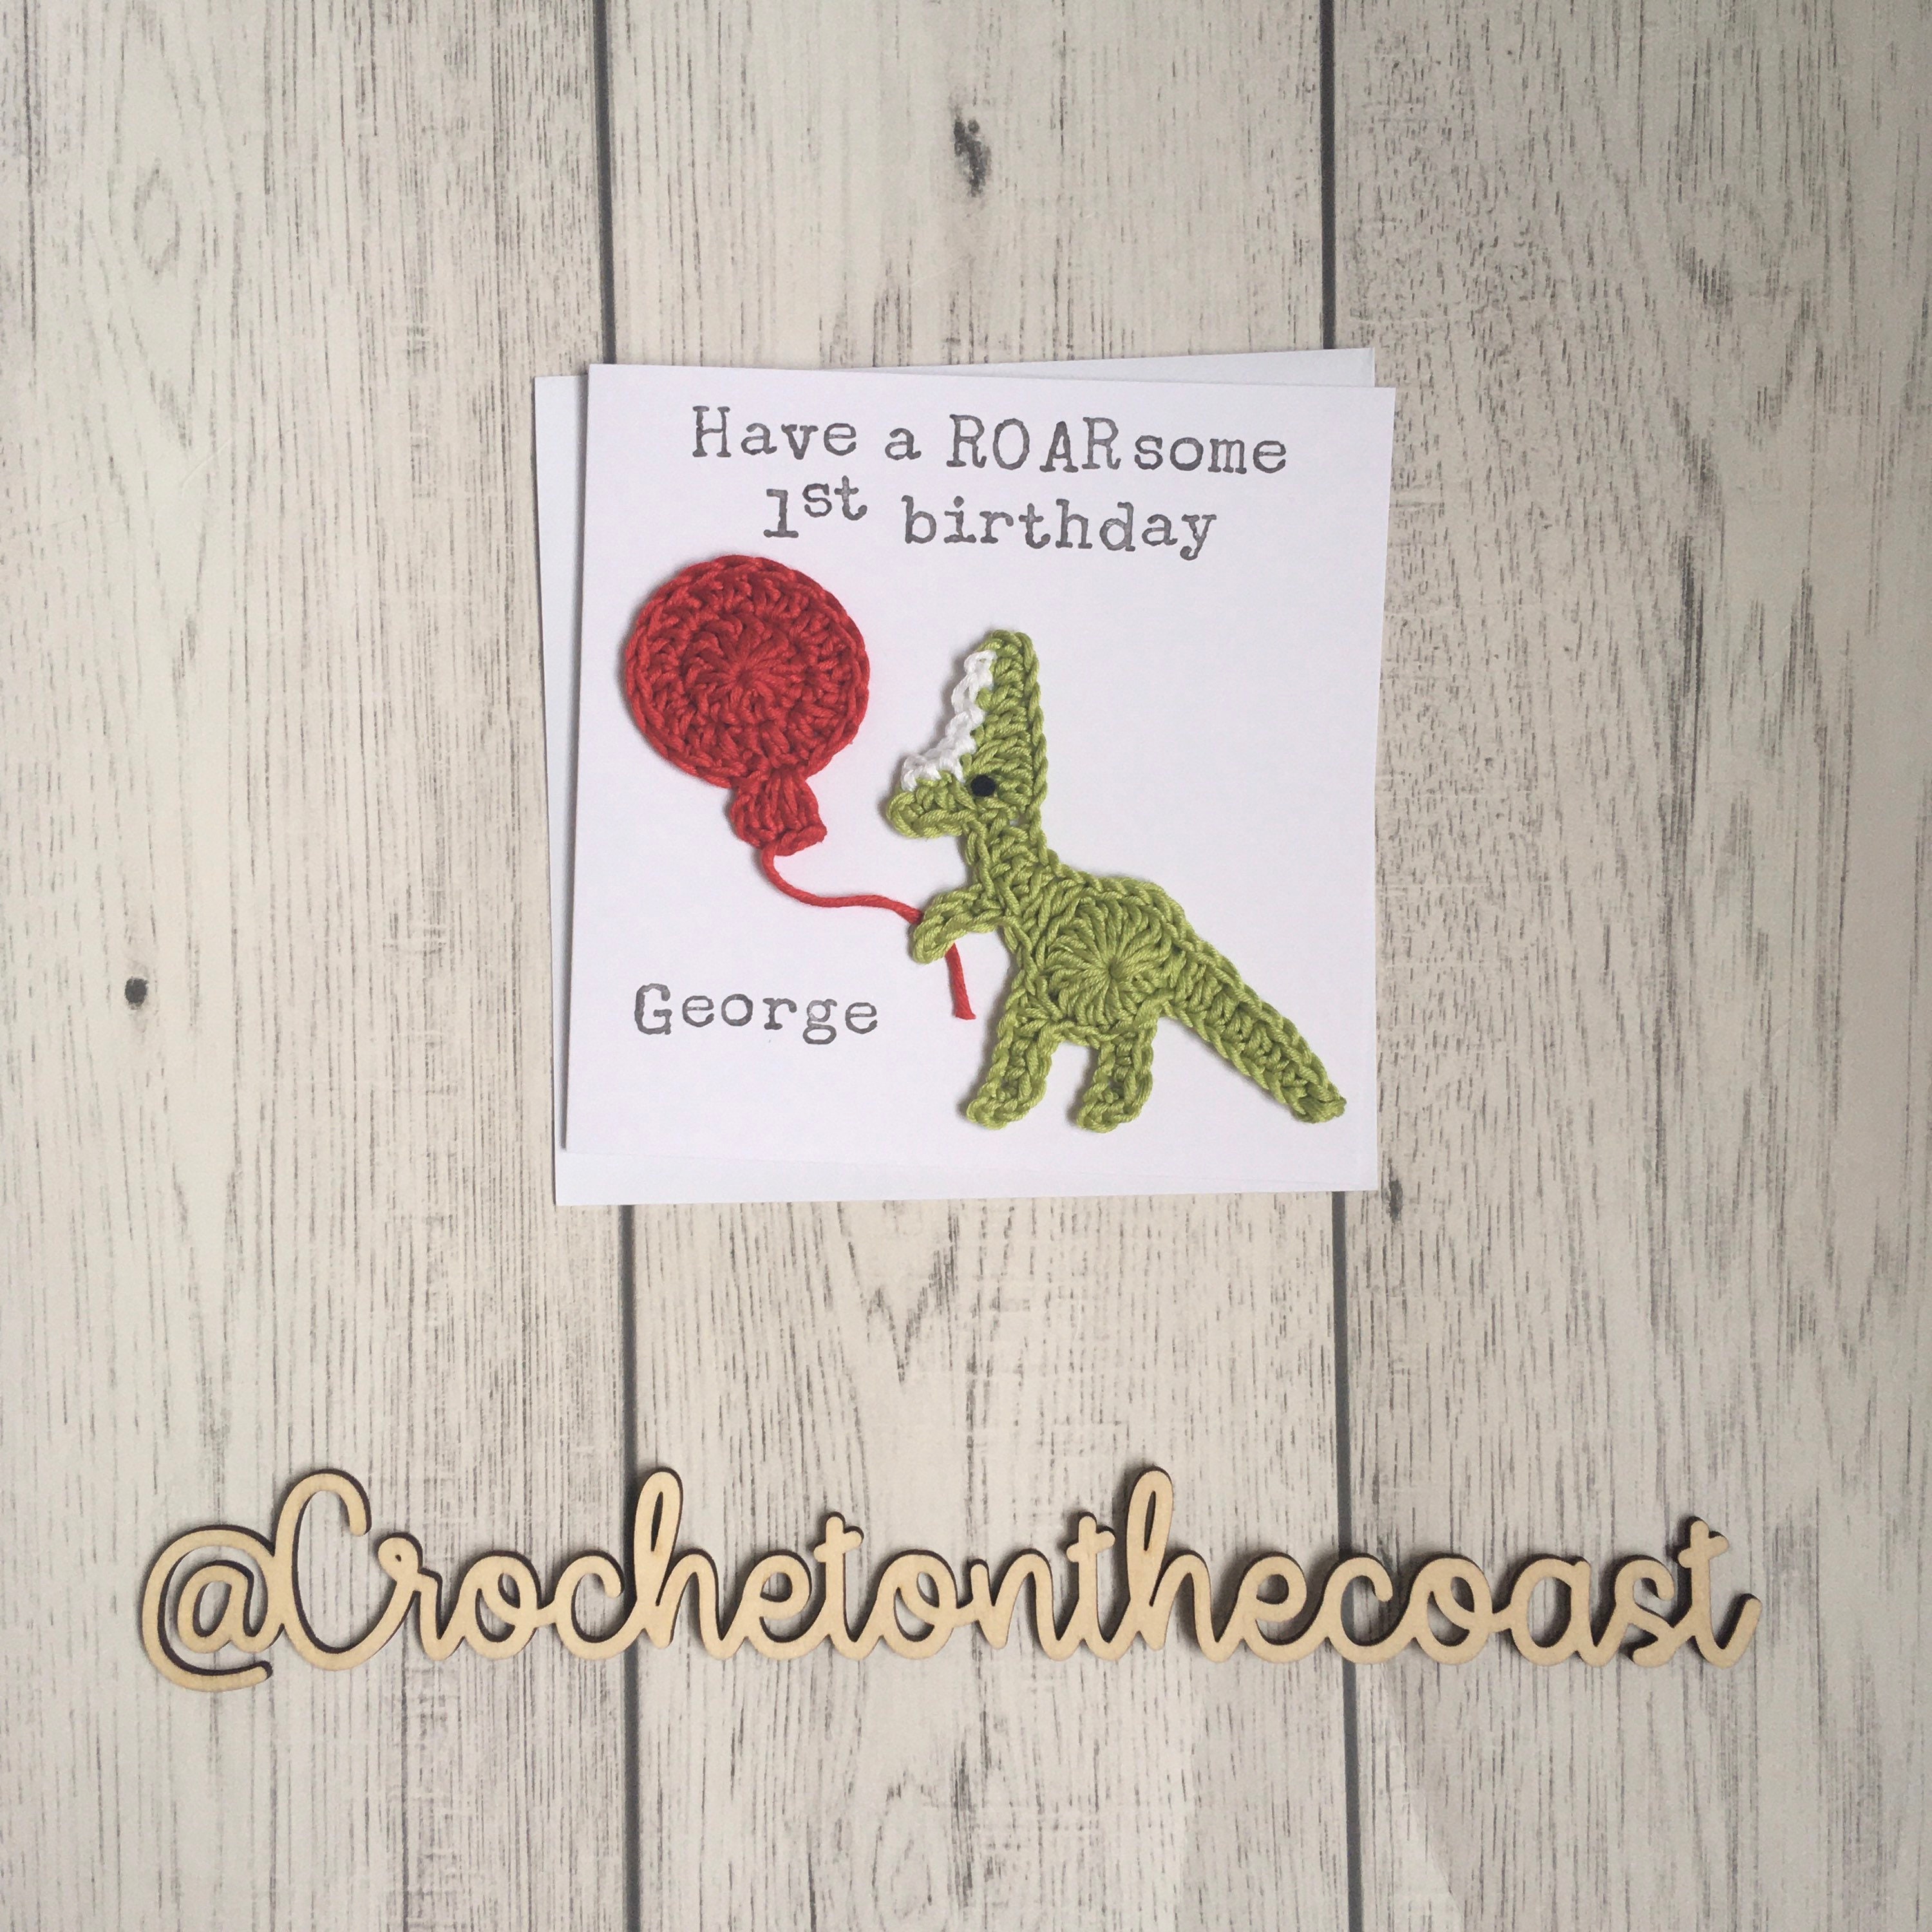 Have a Roarsome Day with Everything Dinosaur